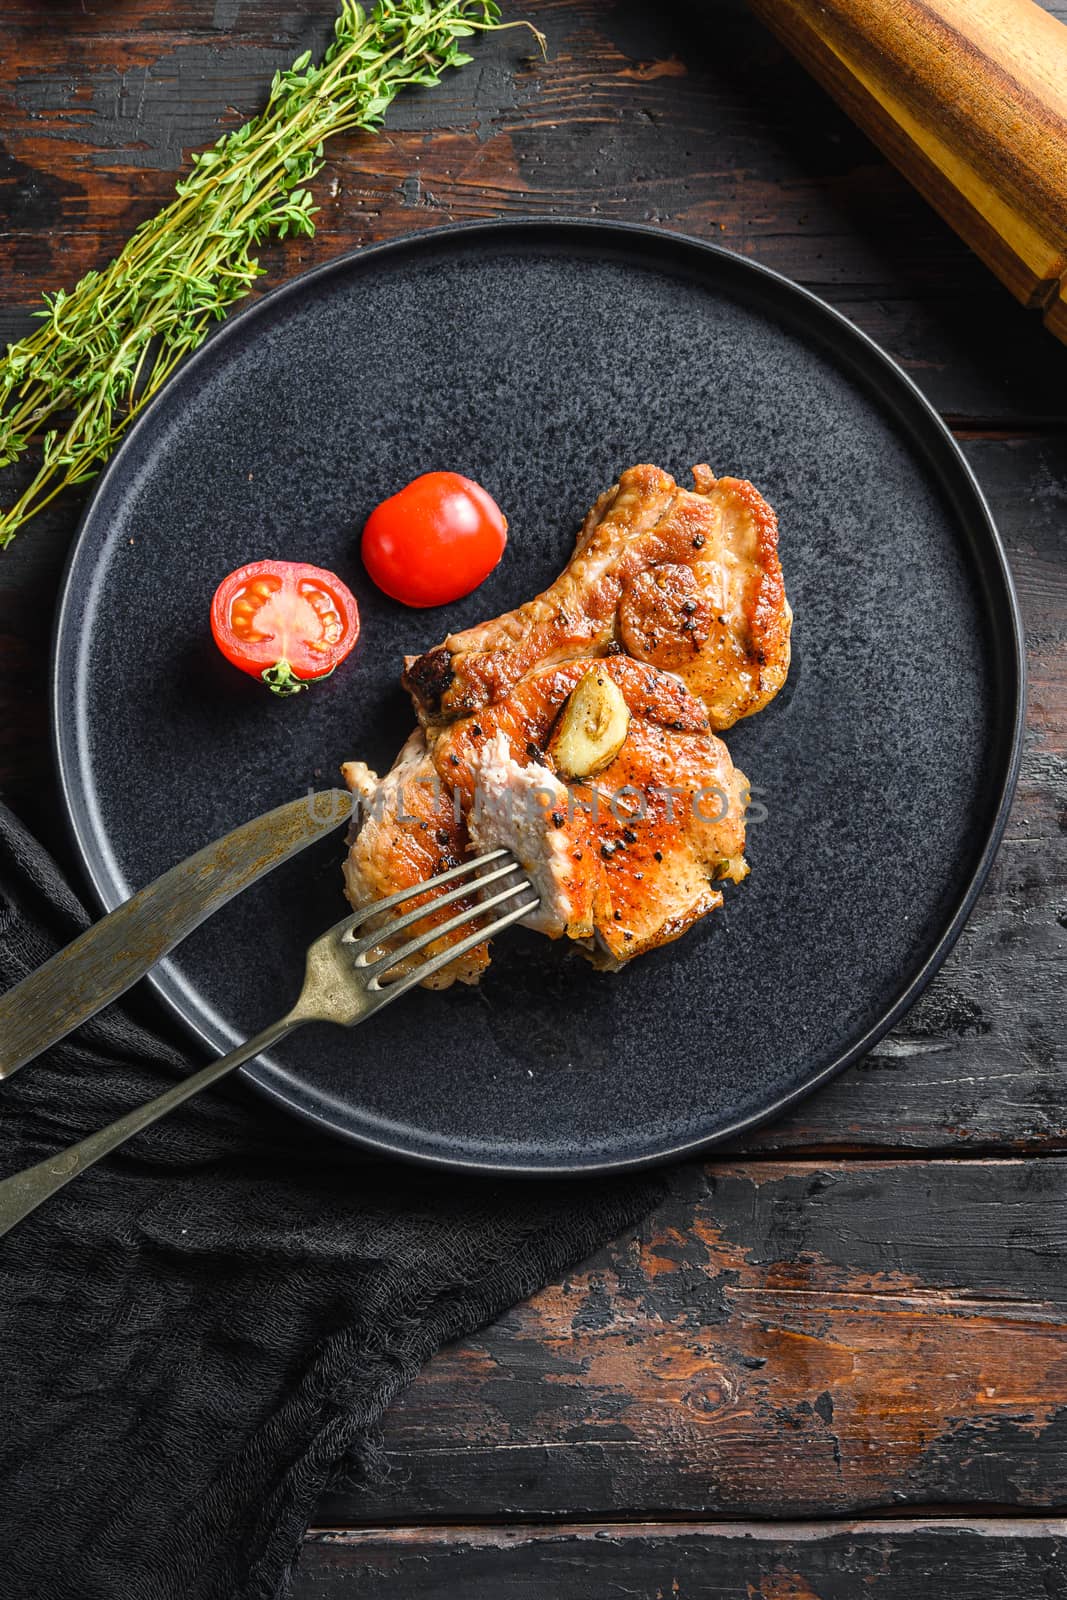 Dish of grilled pork chop with tomatoes top view with knife and slice on fork over old rustic dark wood table table flatlay top view vertical.